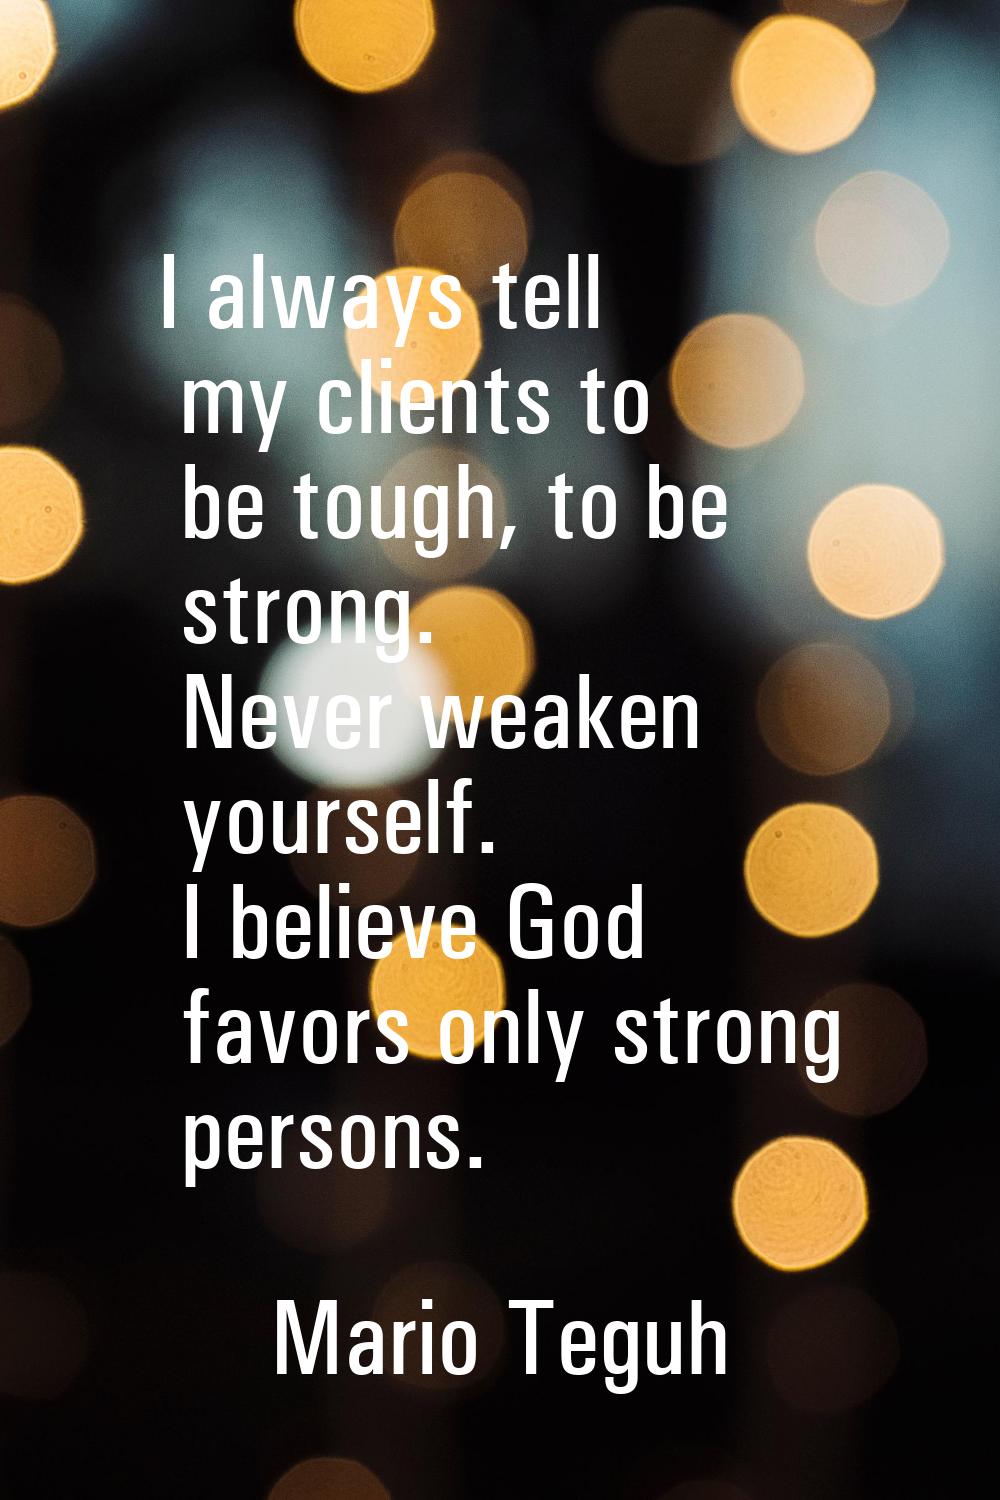 I always tell my clients to be tough, to be strong. Never weaken yourself. I believe God favors onl